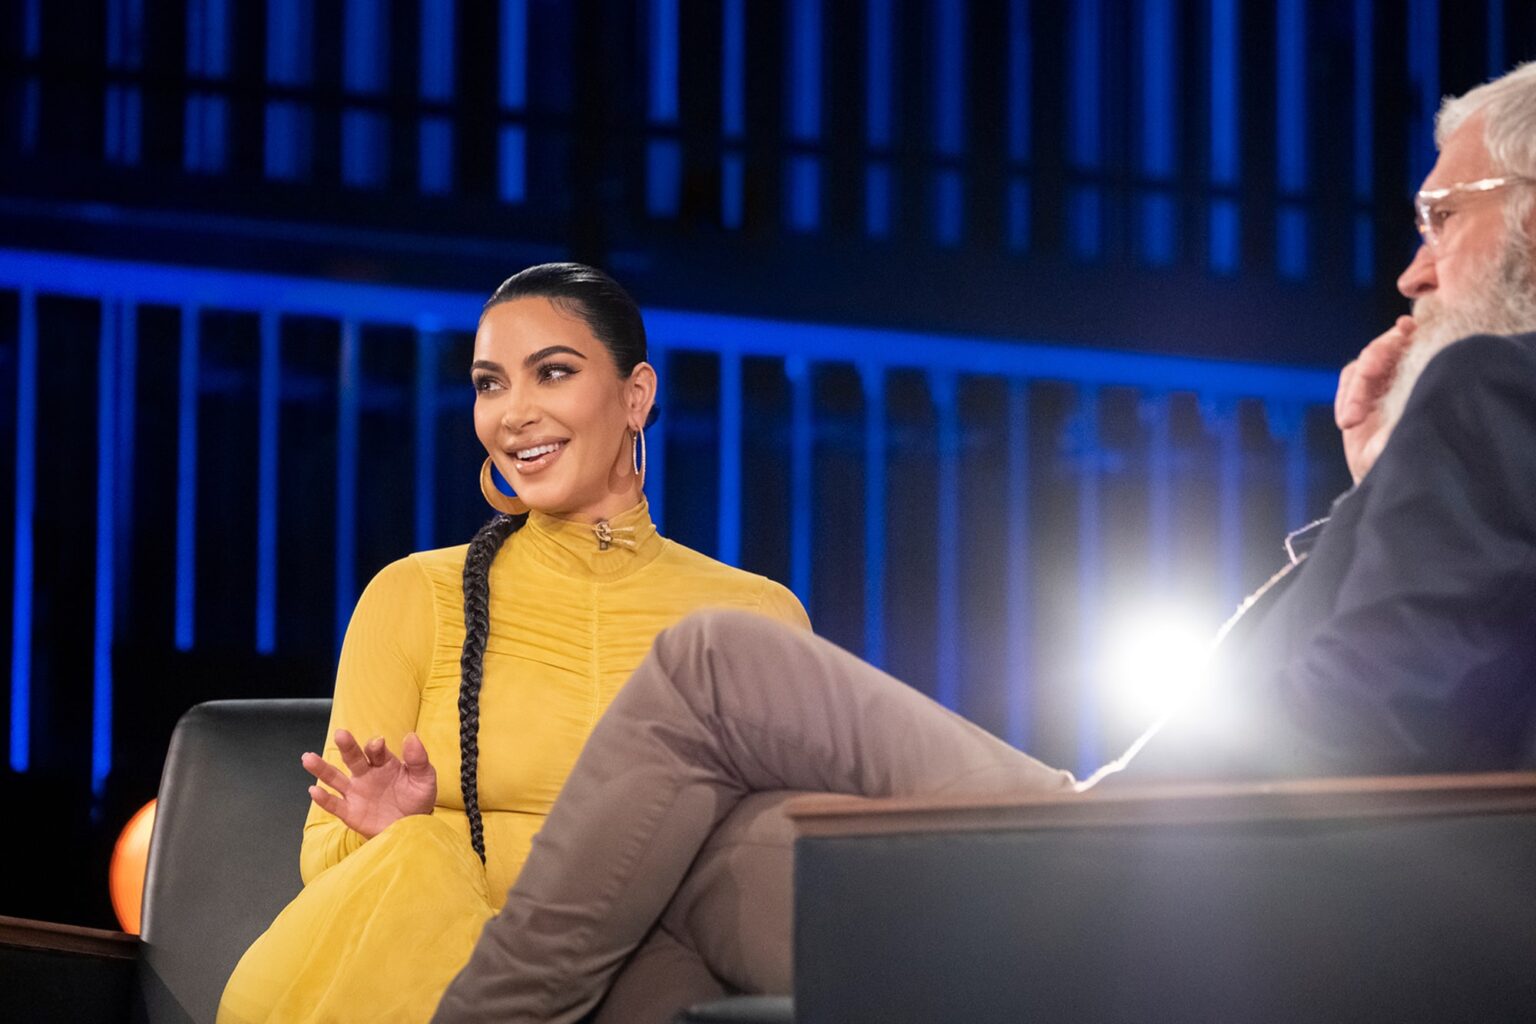 Kim Kardashian West recently did an interview with David Letterman talking about everything from her sex tape to the Paris robbery.